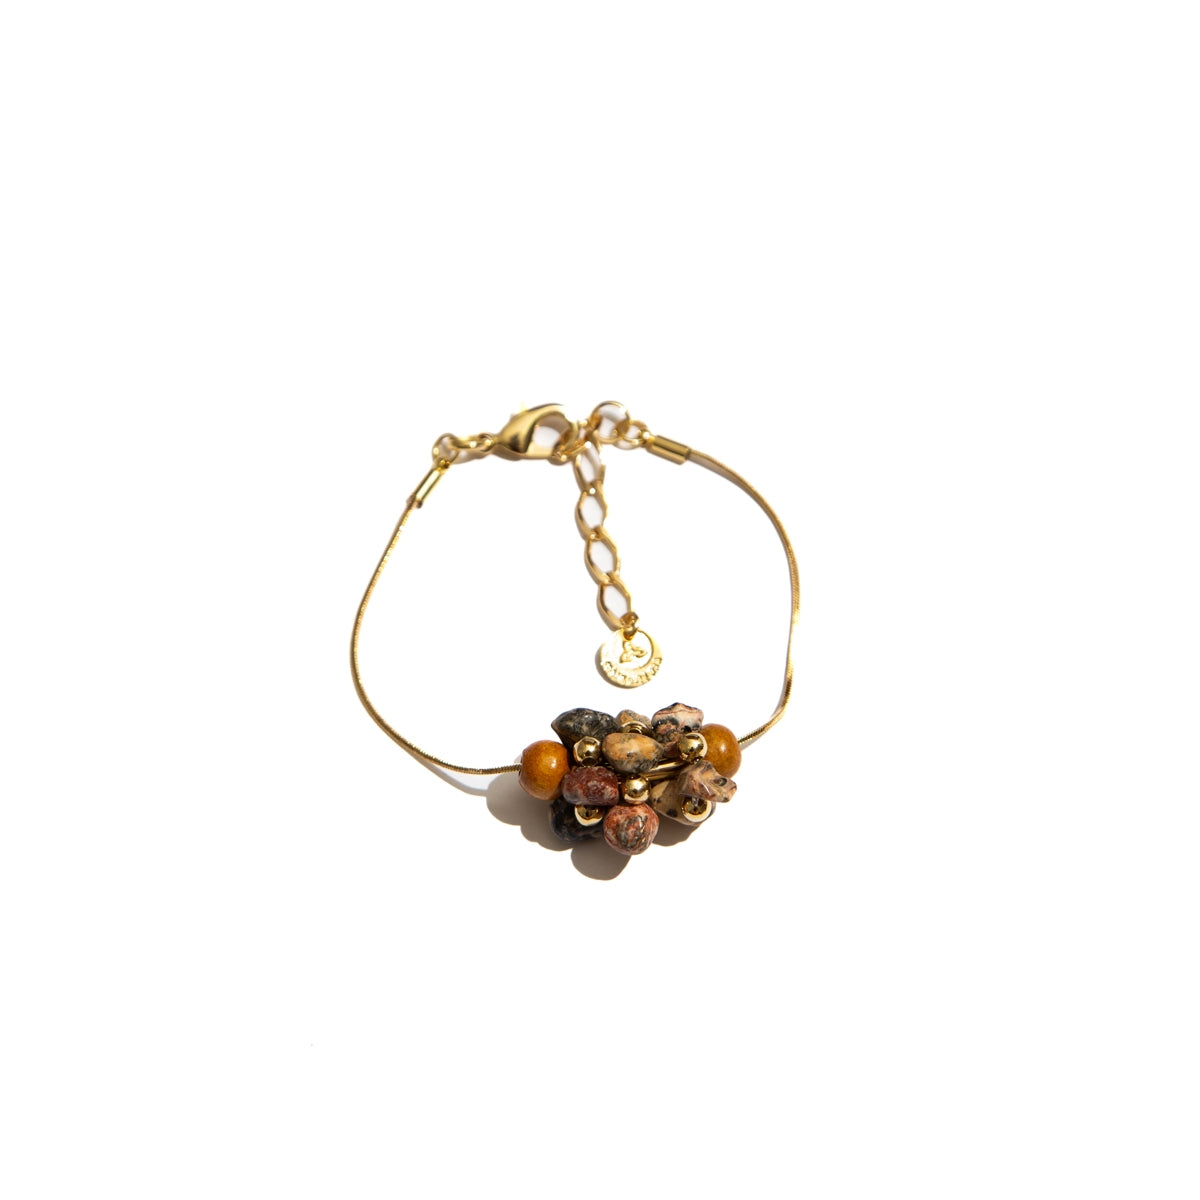 Natalia bracelet with stones, wooden beads, and metals plated in gold